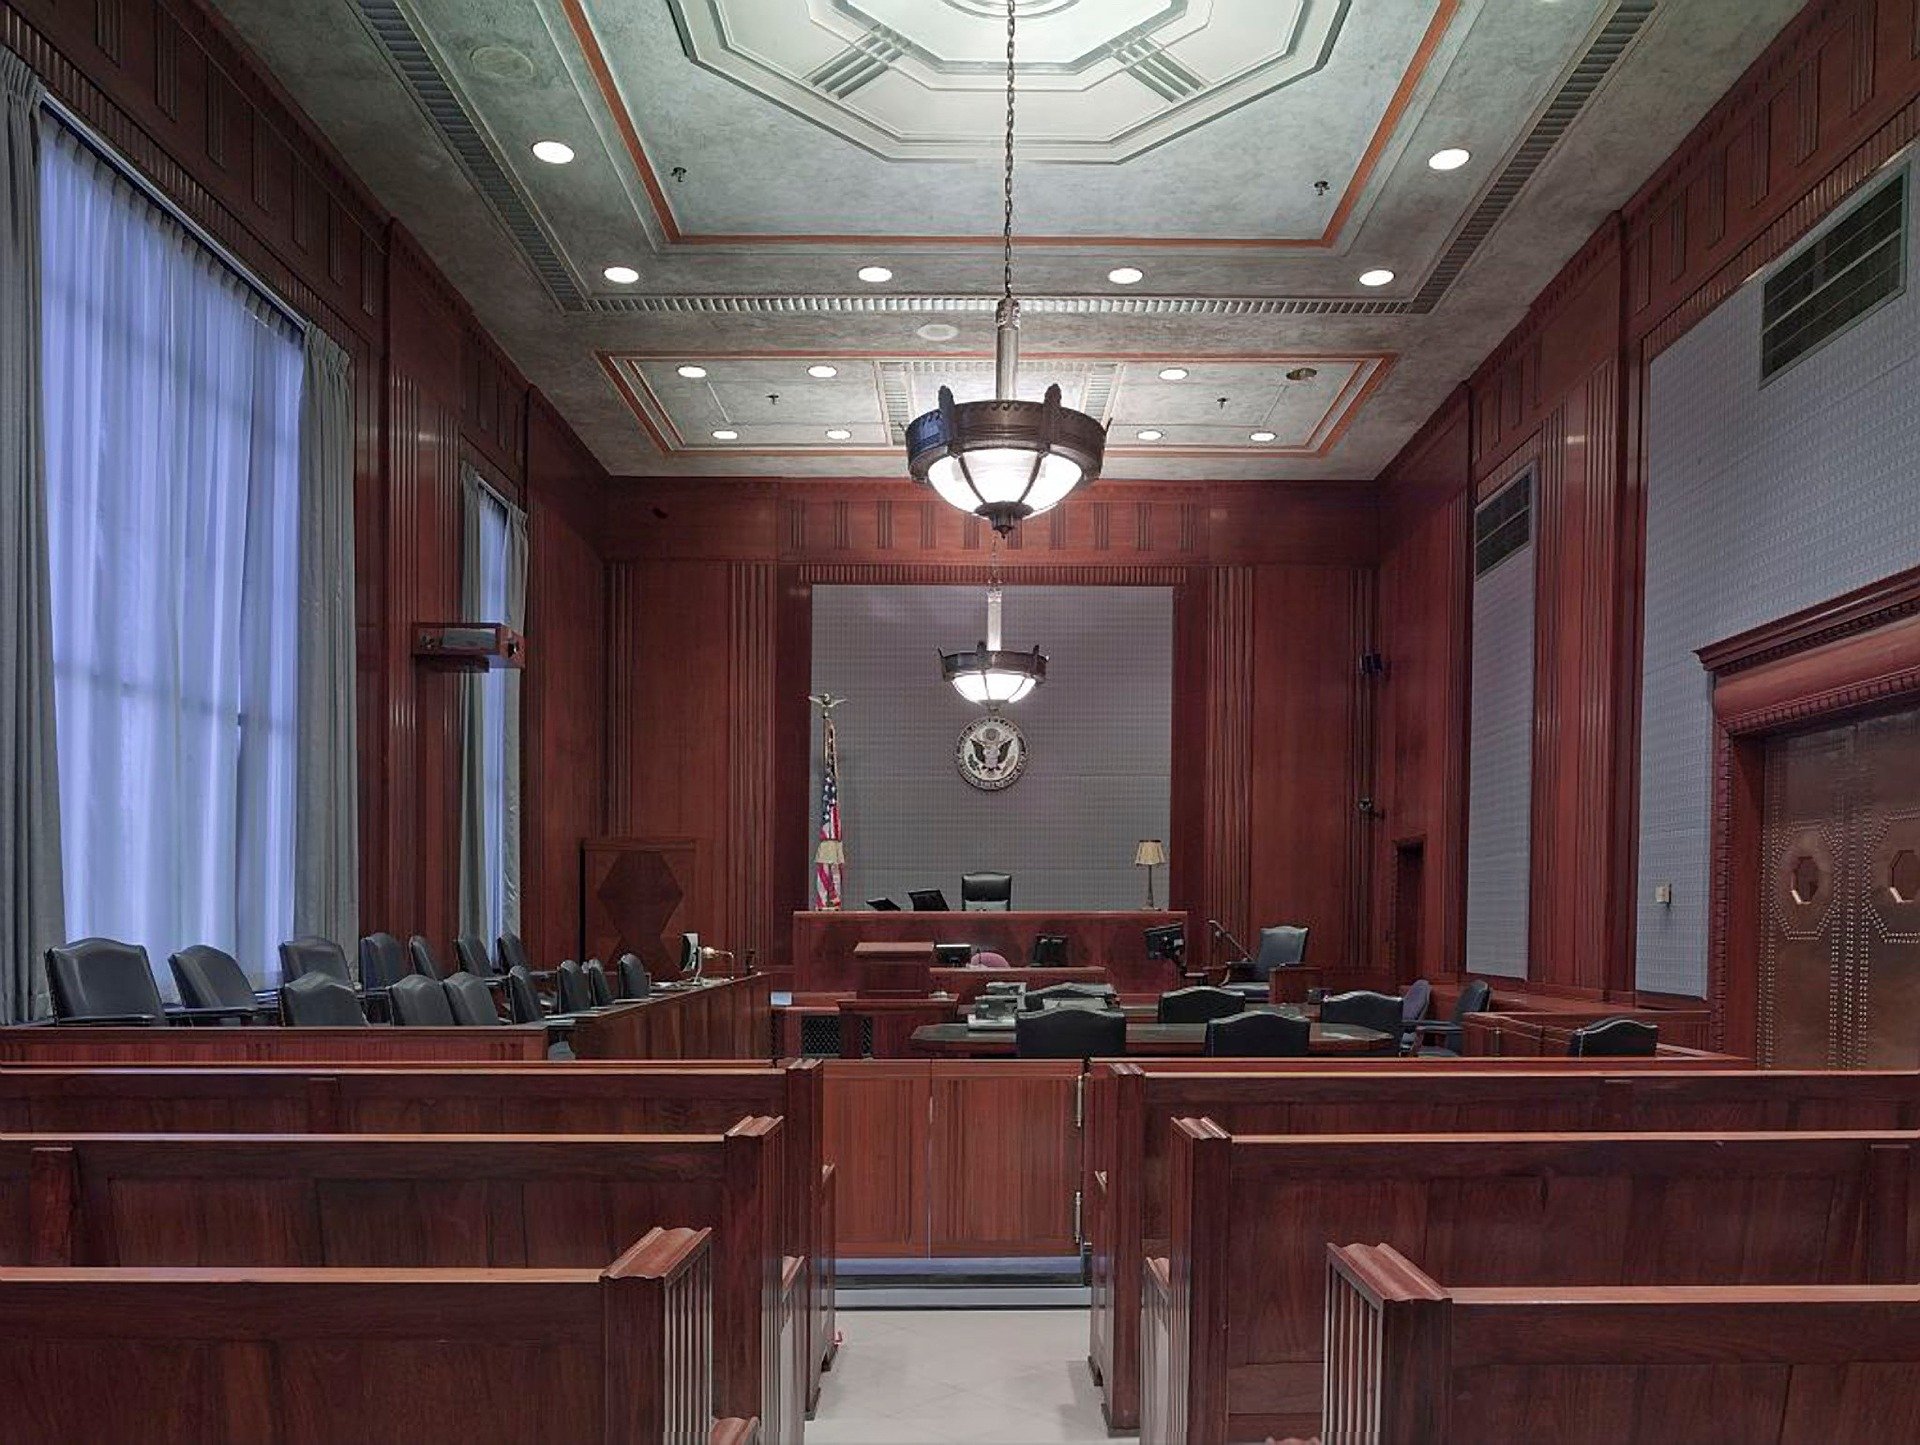 Pictured - Courtroom benches | Sources: Pixabay